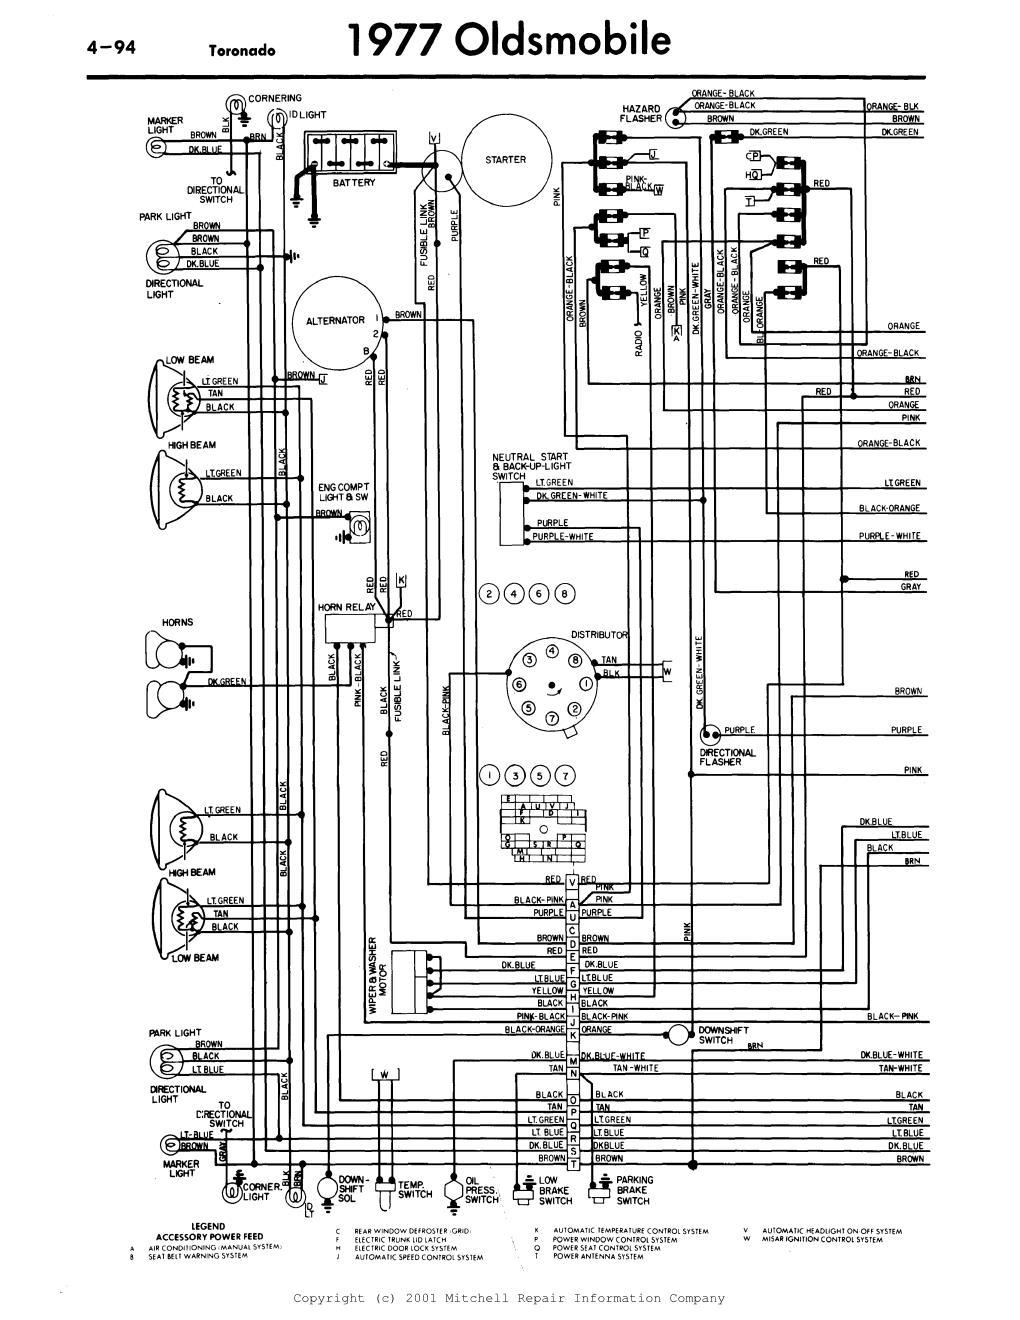 Oldsmobile Wiring Schematic - Wiring Diagrams